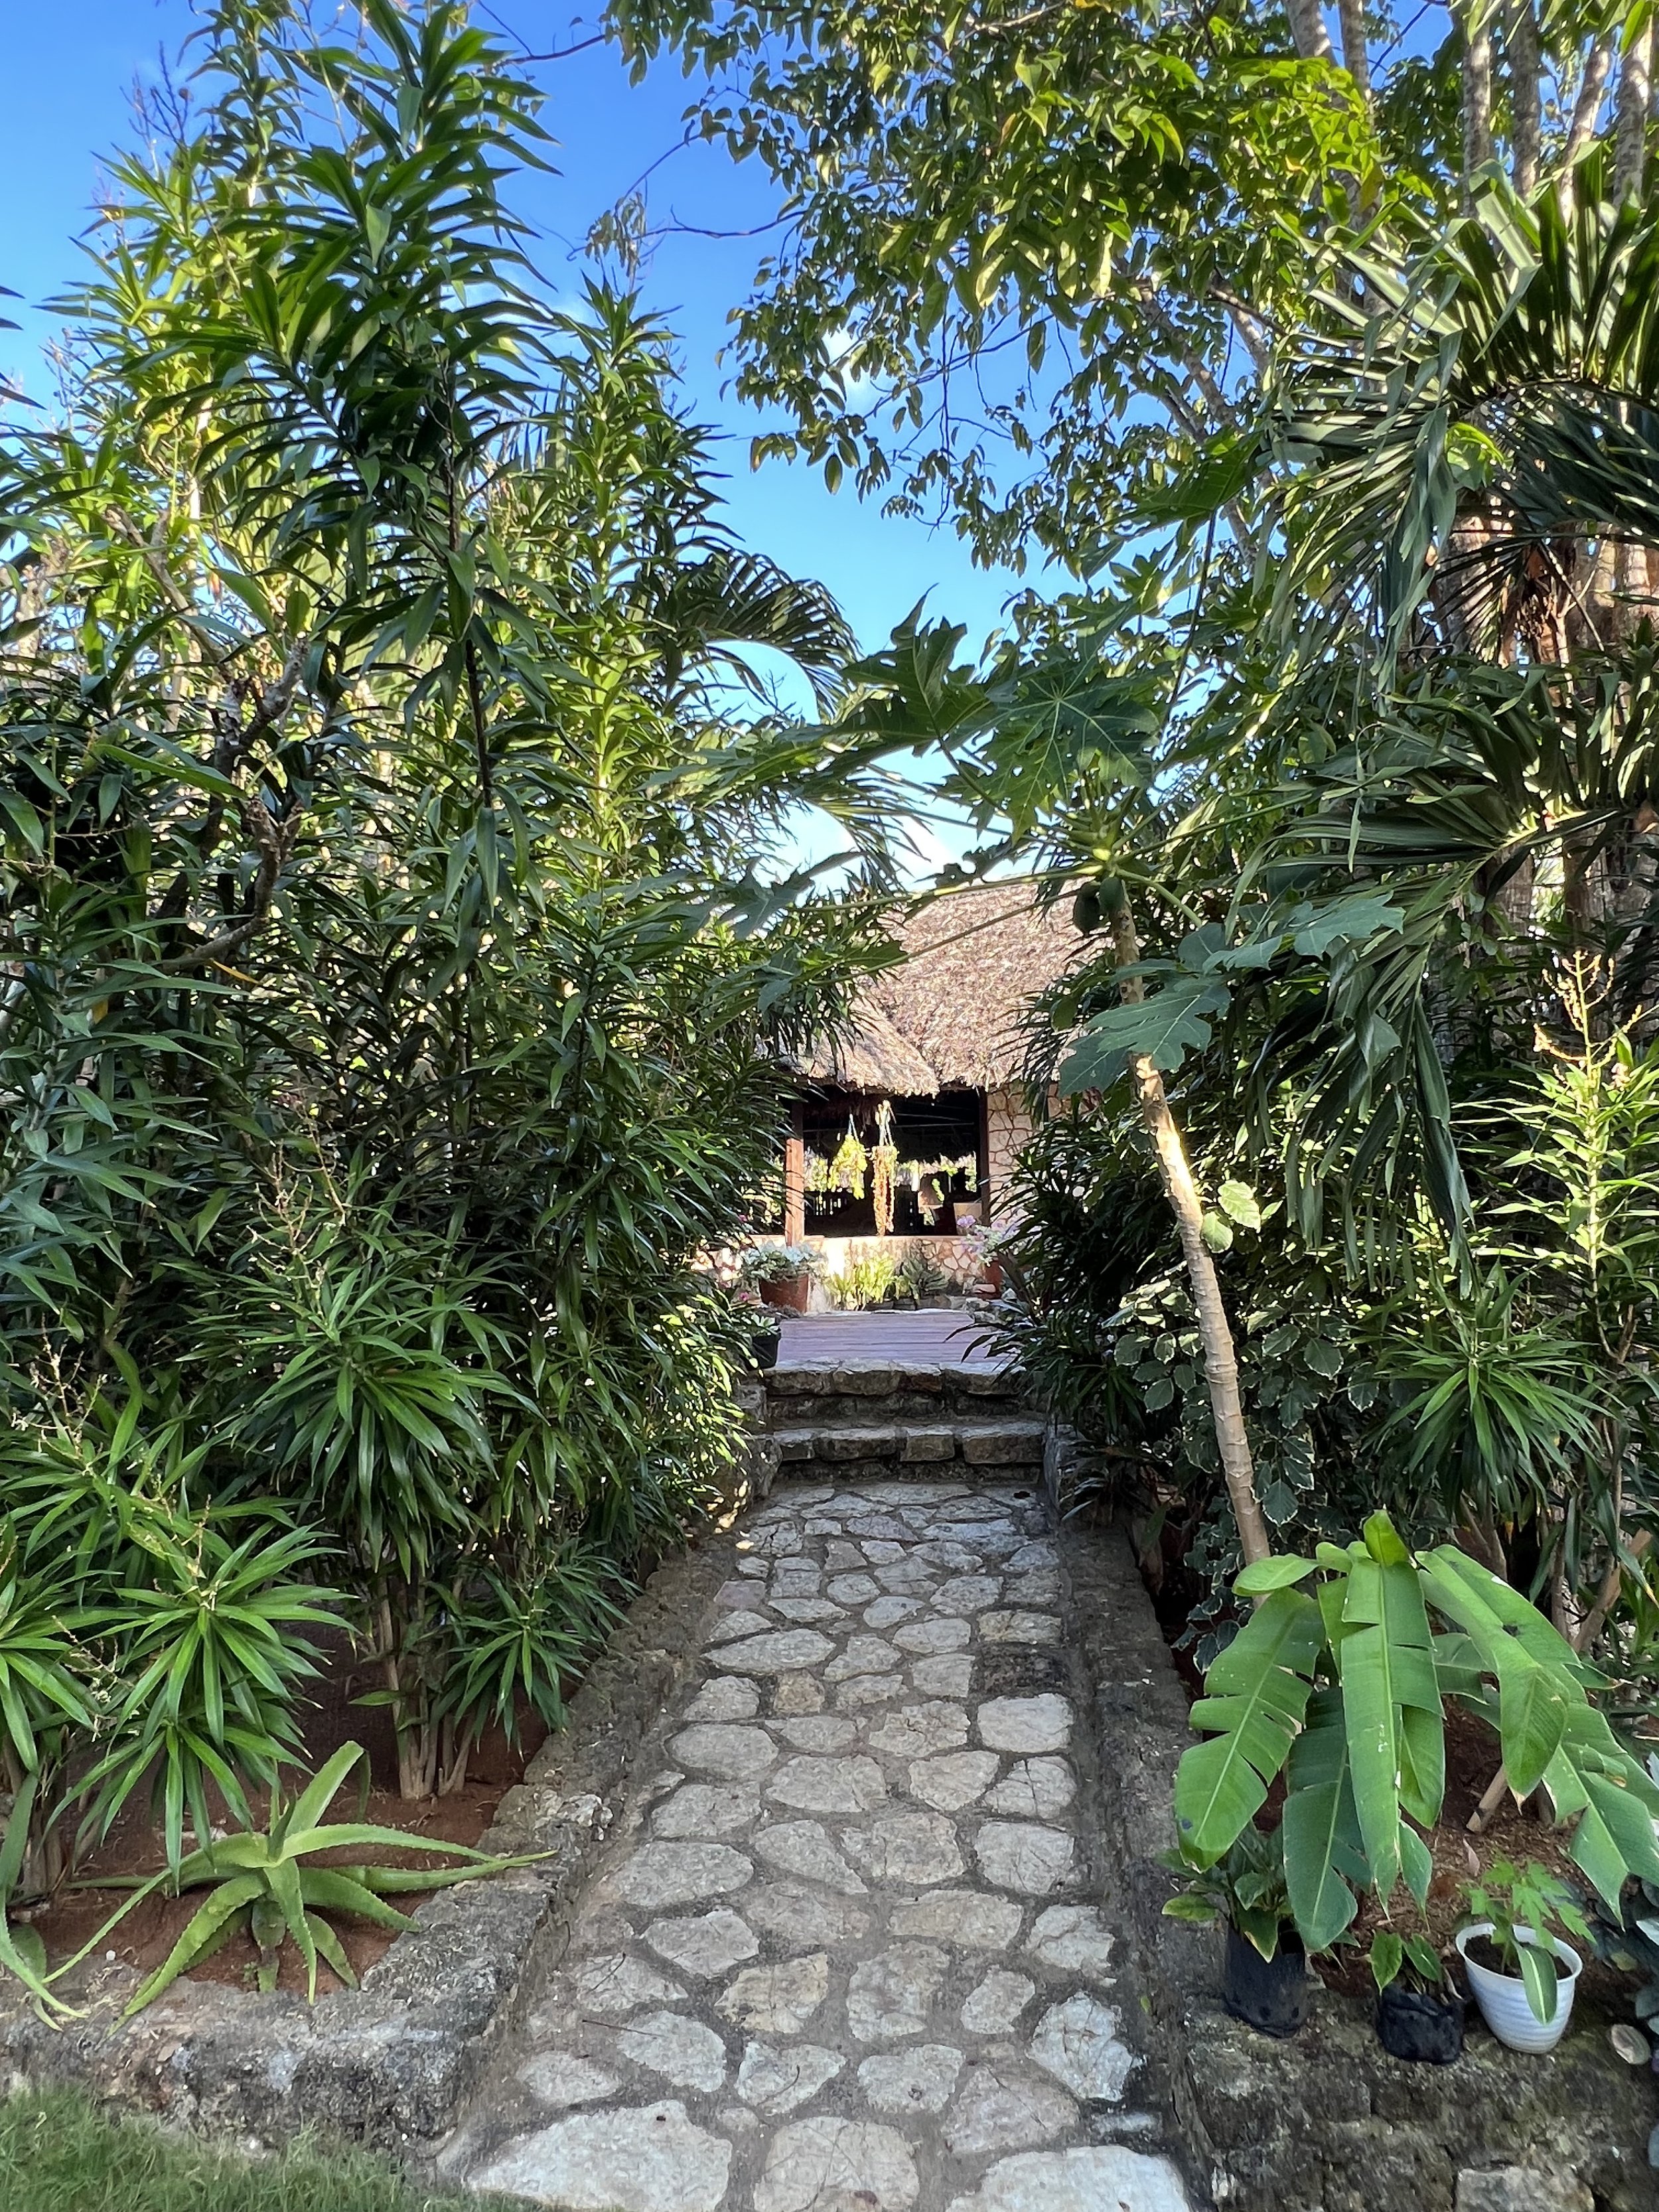 Lush gardens and fruiting trees is part of the Lualemba oasis